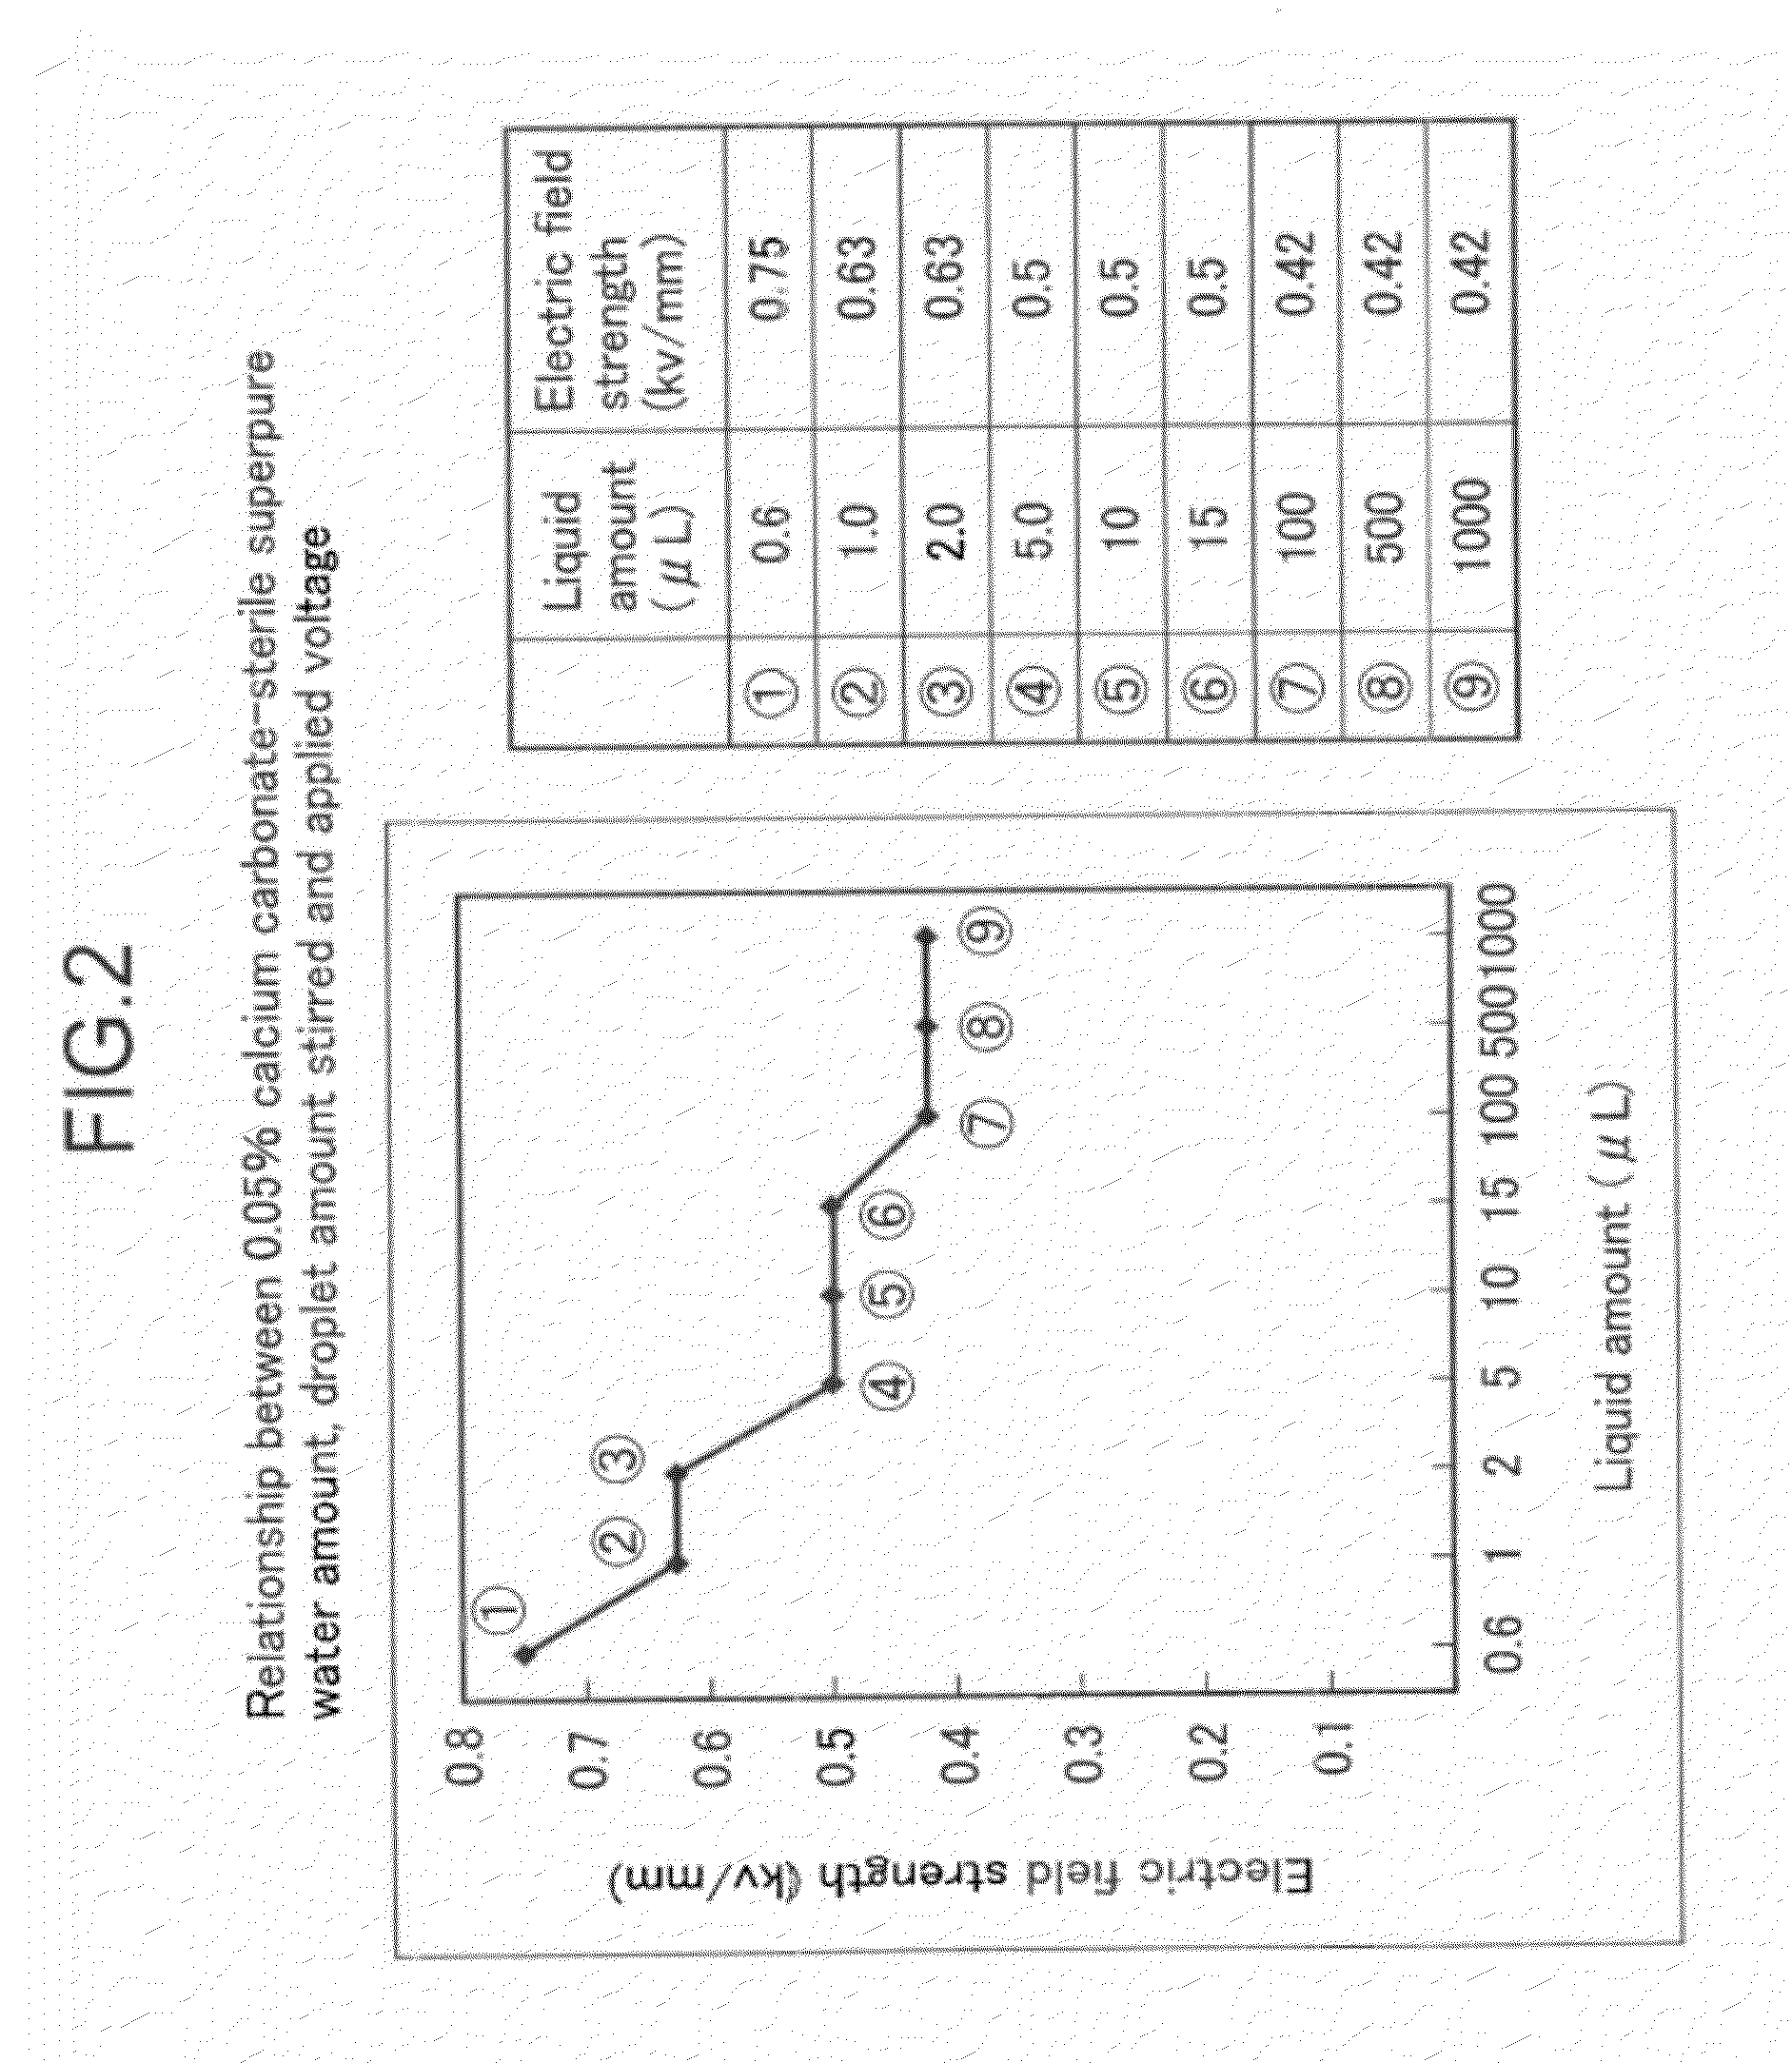 Noncontact stirring method, noncontact stirring apparatus, method and apparatus for reacting nucleic acid hybridization using the apparatus, method for detecting nucleic acid in sample, apparatus for detecting nucleic acid, method for detecting antibody in sample, apparatus for detecting antibody